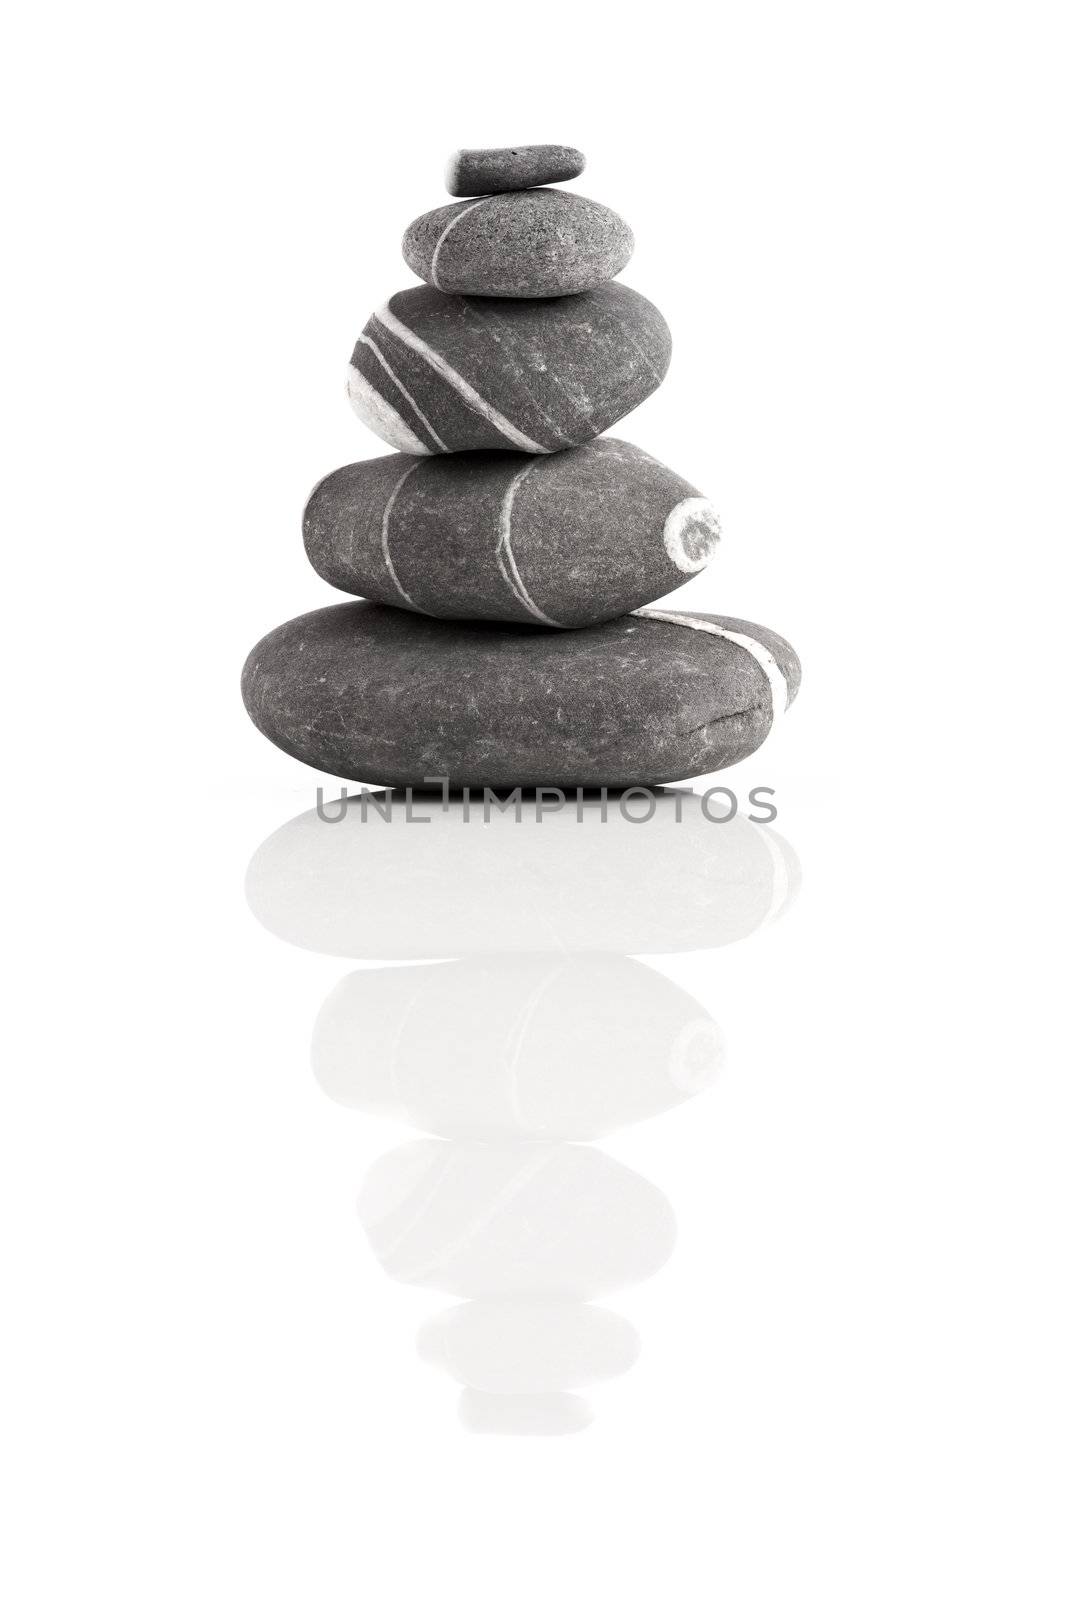 Stones pyramid isolated on white background with reflection